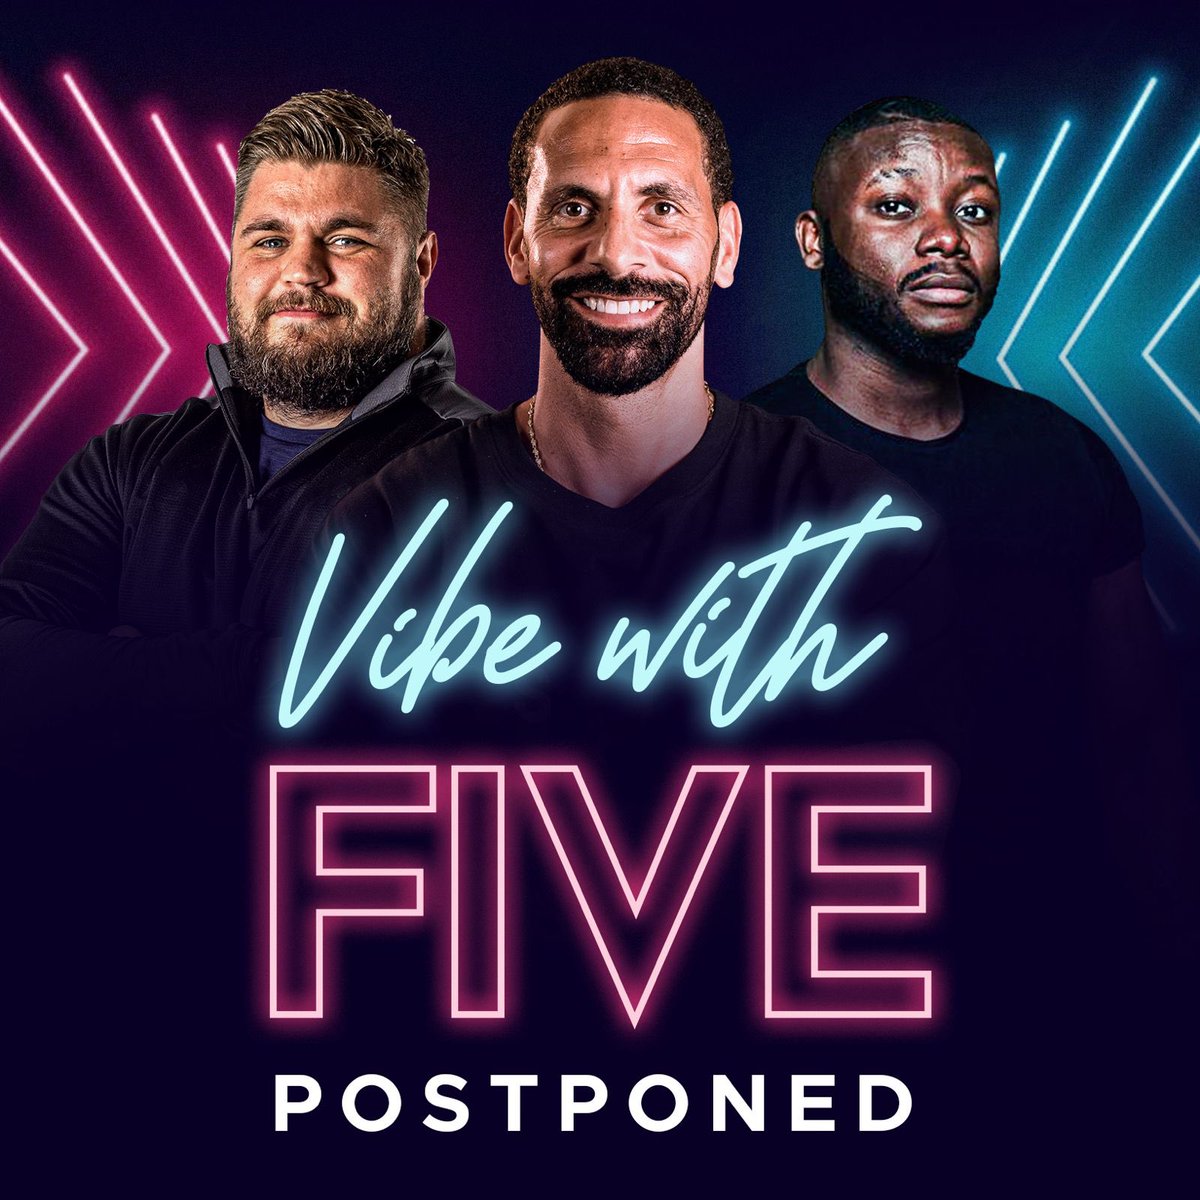 Yes people, just to let you know Vibe With Five has been postponed this week as Rio hasn’t been feeling too well. We will be back on Monday for another episode of Vibe With Five. Please wish my guy Rio a good recovery ❤️‍🩹